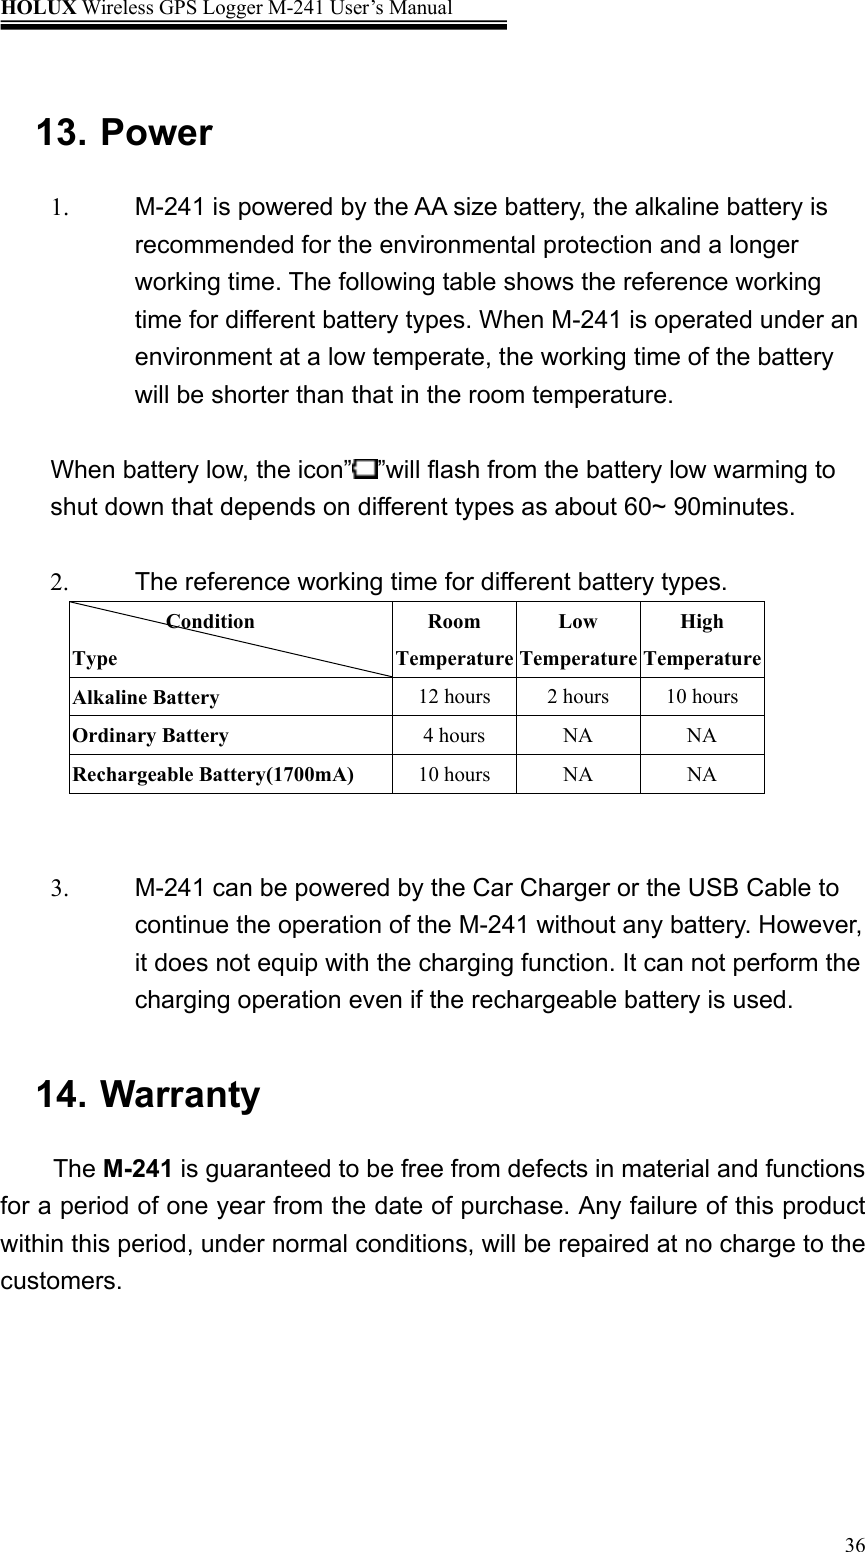 HOLUX Wireless GPS Logger M-241 User’s Manual   36 13. Power   1.  M-241 is powered by the AA size battery, the alkaline battery is recommended for the environmental protection and a longer working time. The following table shows the reference working time for different battery types. When M-241 is operated under an environment at a low temperate, the working time of the battery will be shorter than that in the room temperature.  When battery low, the icon” ”will flash from the battery low warming to shut down that depends on different types as about 60~ 90minutes.         2.  The reference working time for different battery types.          Condition Type Room TemperatureLow TemperatureHigh Temperature Alkaline Battery  12 hours 2 hours 10 hours Ordinary Battery  4 hours  NA  NA Rechargeable Battery(1700mA)  10 hours  NA  NA   3.  M-241 can be powered by the Car Charger or the USB Cable to continue the operation of the M-241 without any battery. However, it does not equip with the charging function. It can not perform the charging operation even if the rechargeable battery is used.  14. Warranty   The M-241 is guaranteed to be free from defects in material and functions for a period of one year from the date of purchase. Any failure of this product within this period, under normal conditions, will be repaired at no charge to the customers.  